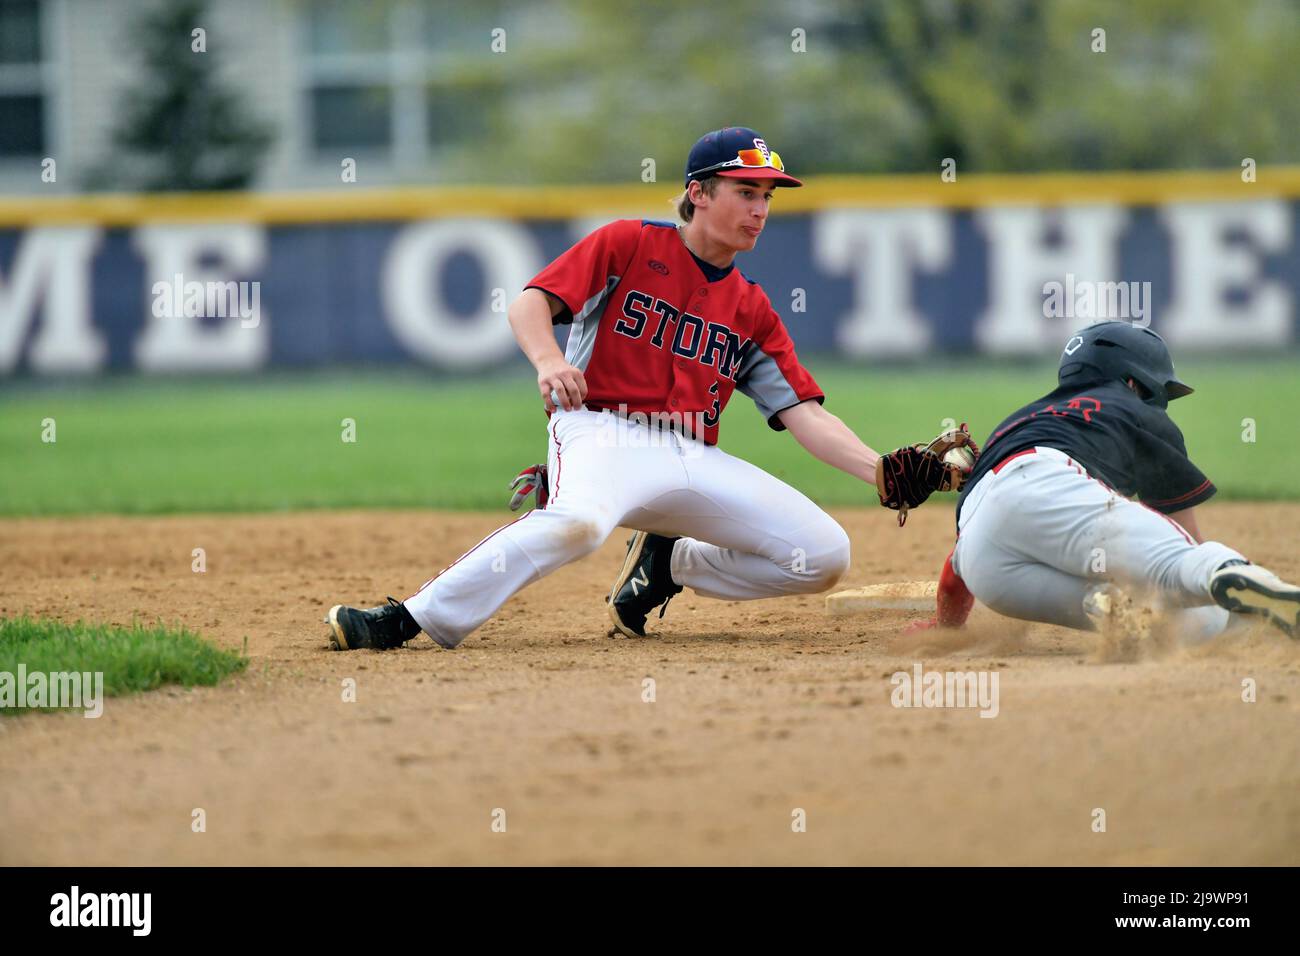 USA. Shortstop applying a tag on a baserunner thwarting a steal attempt. Stock Photo